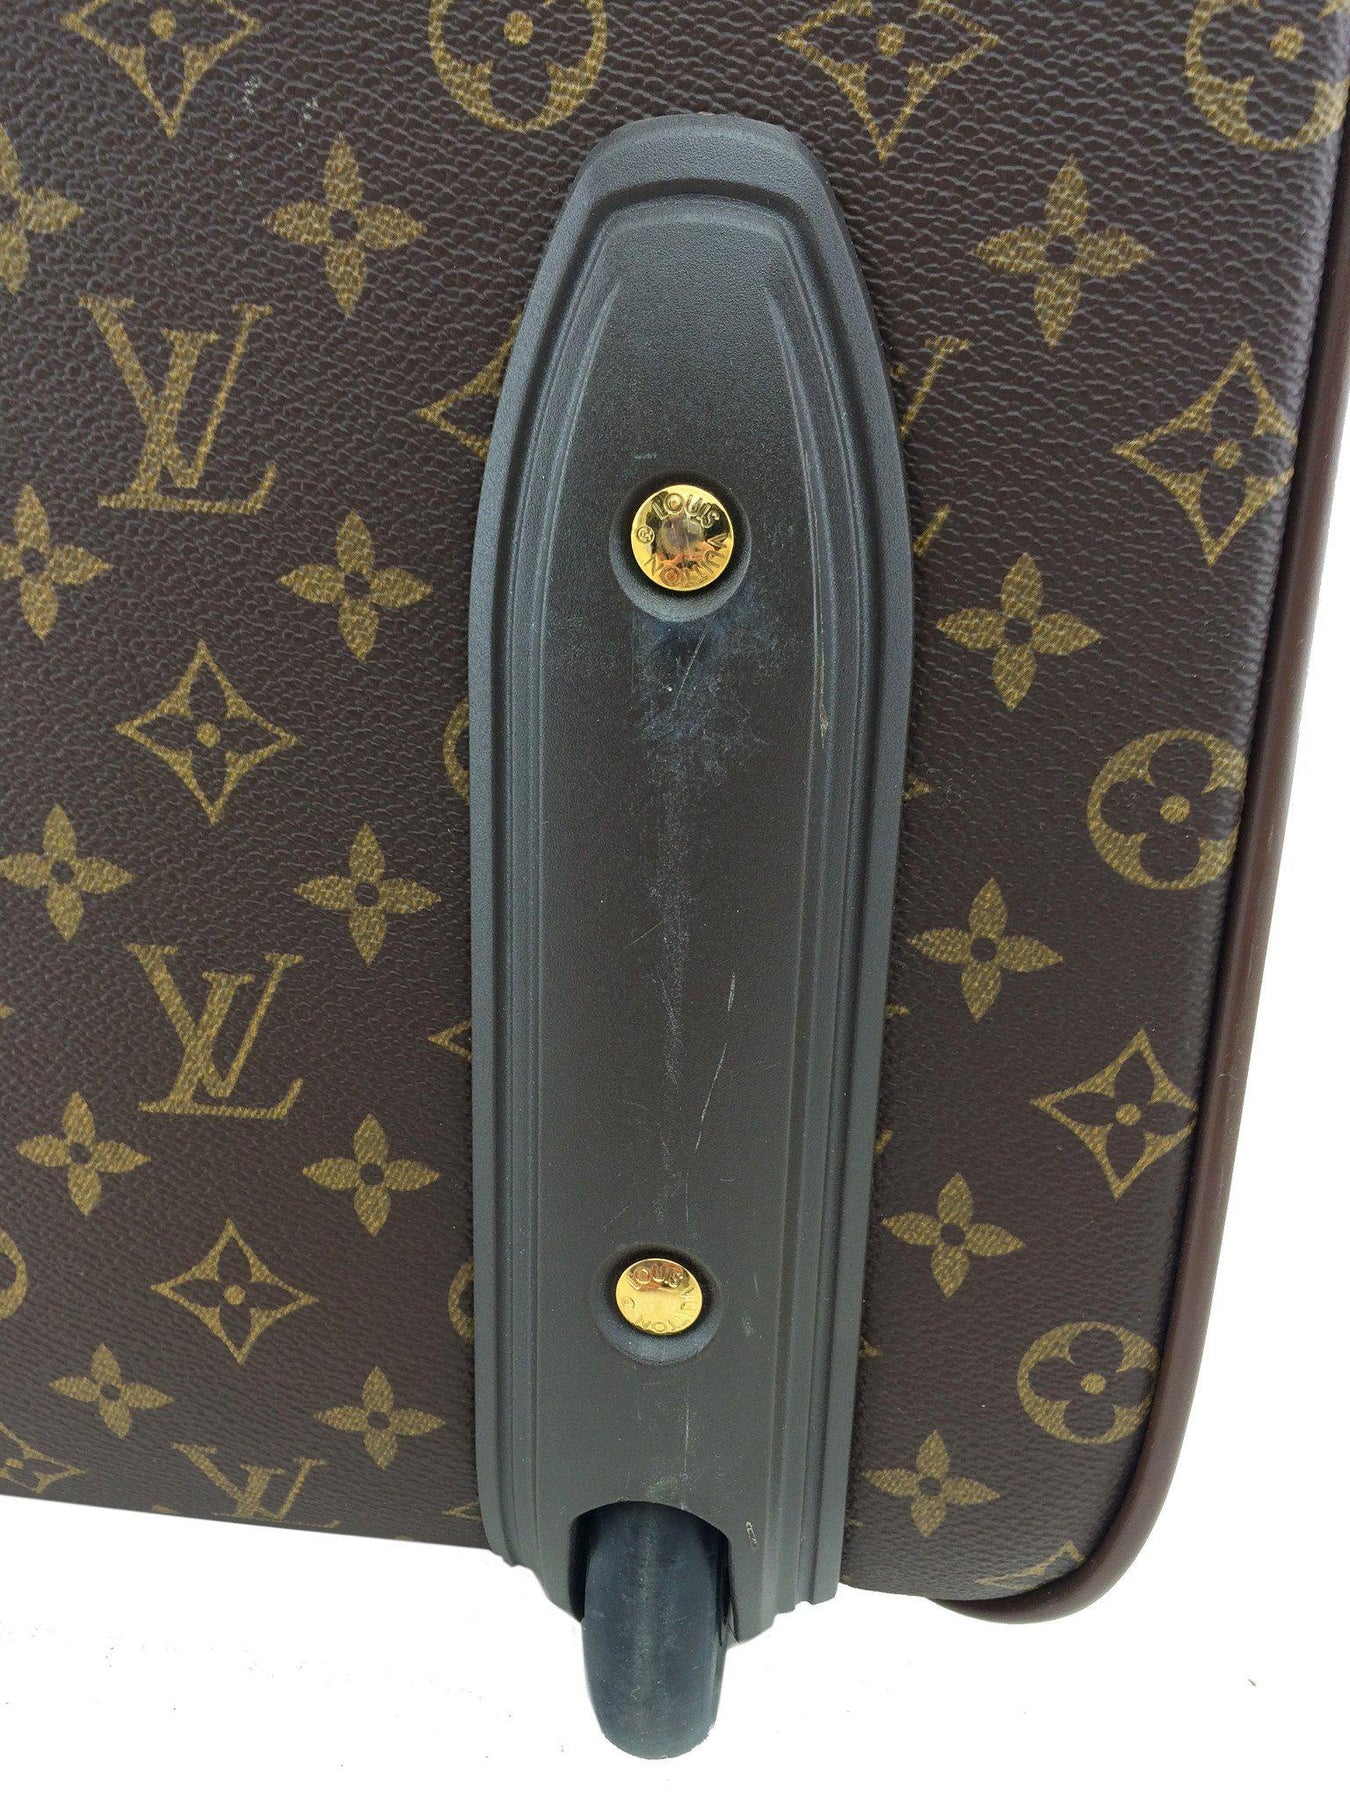 Pegase 50 Monogram Business Roller Carry On - Luggage – Baggio